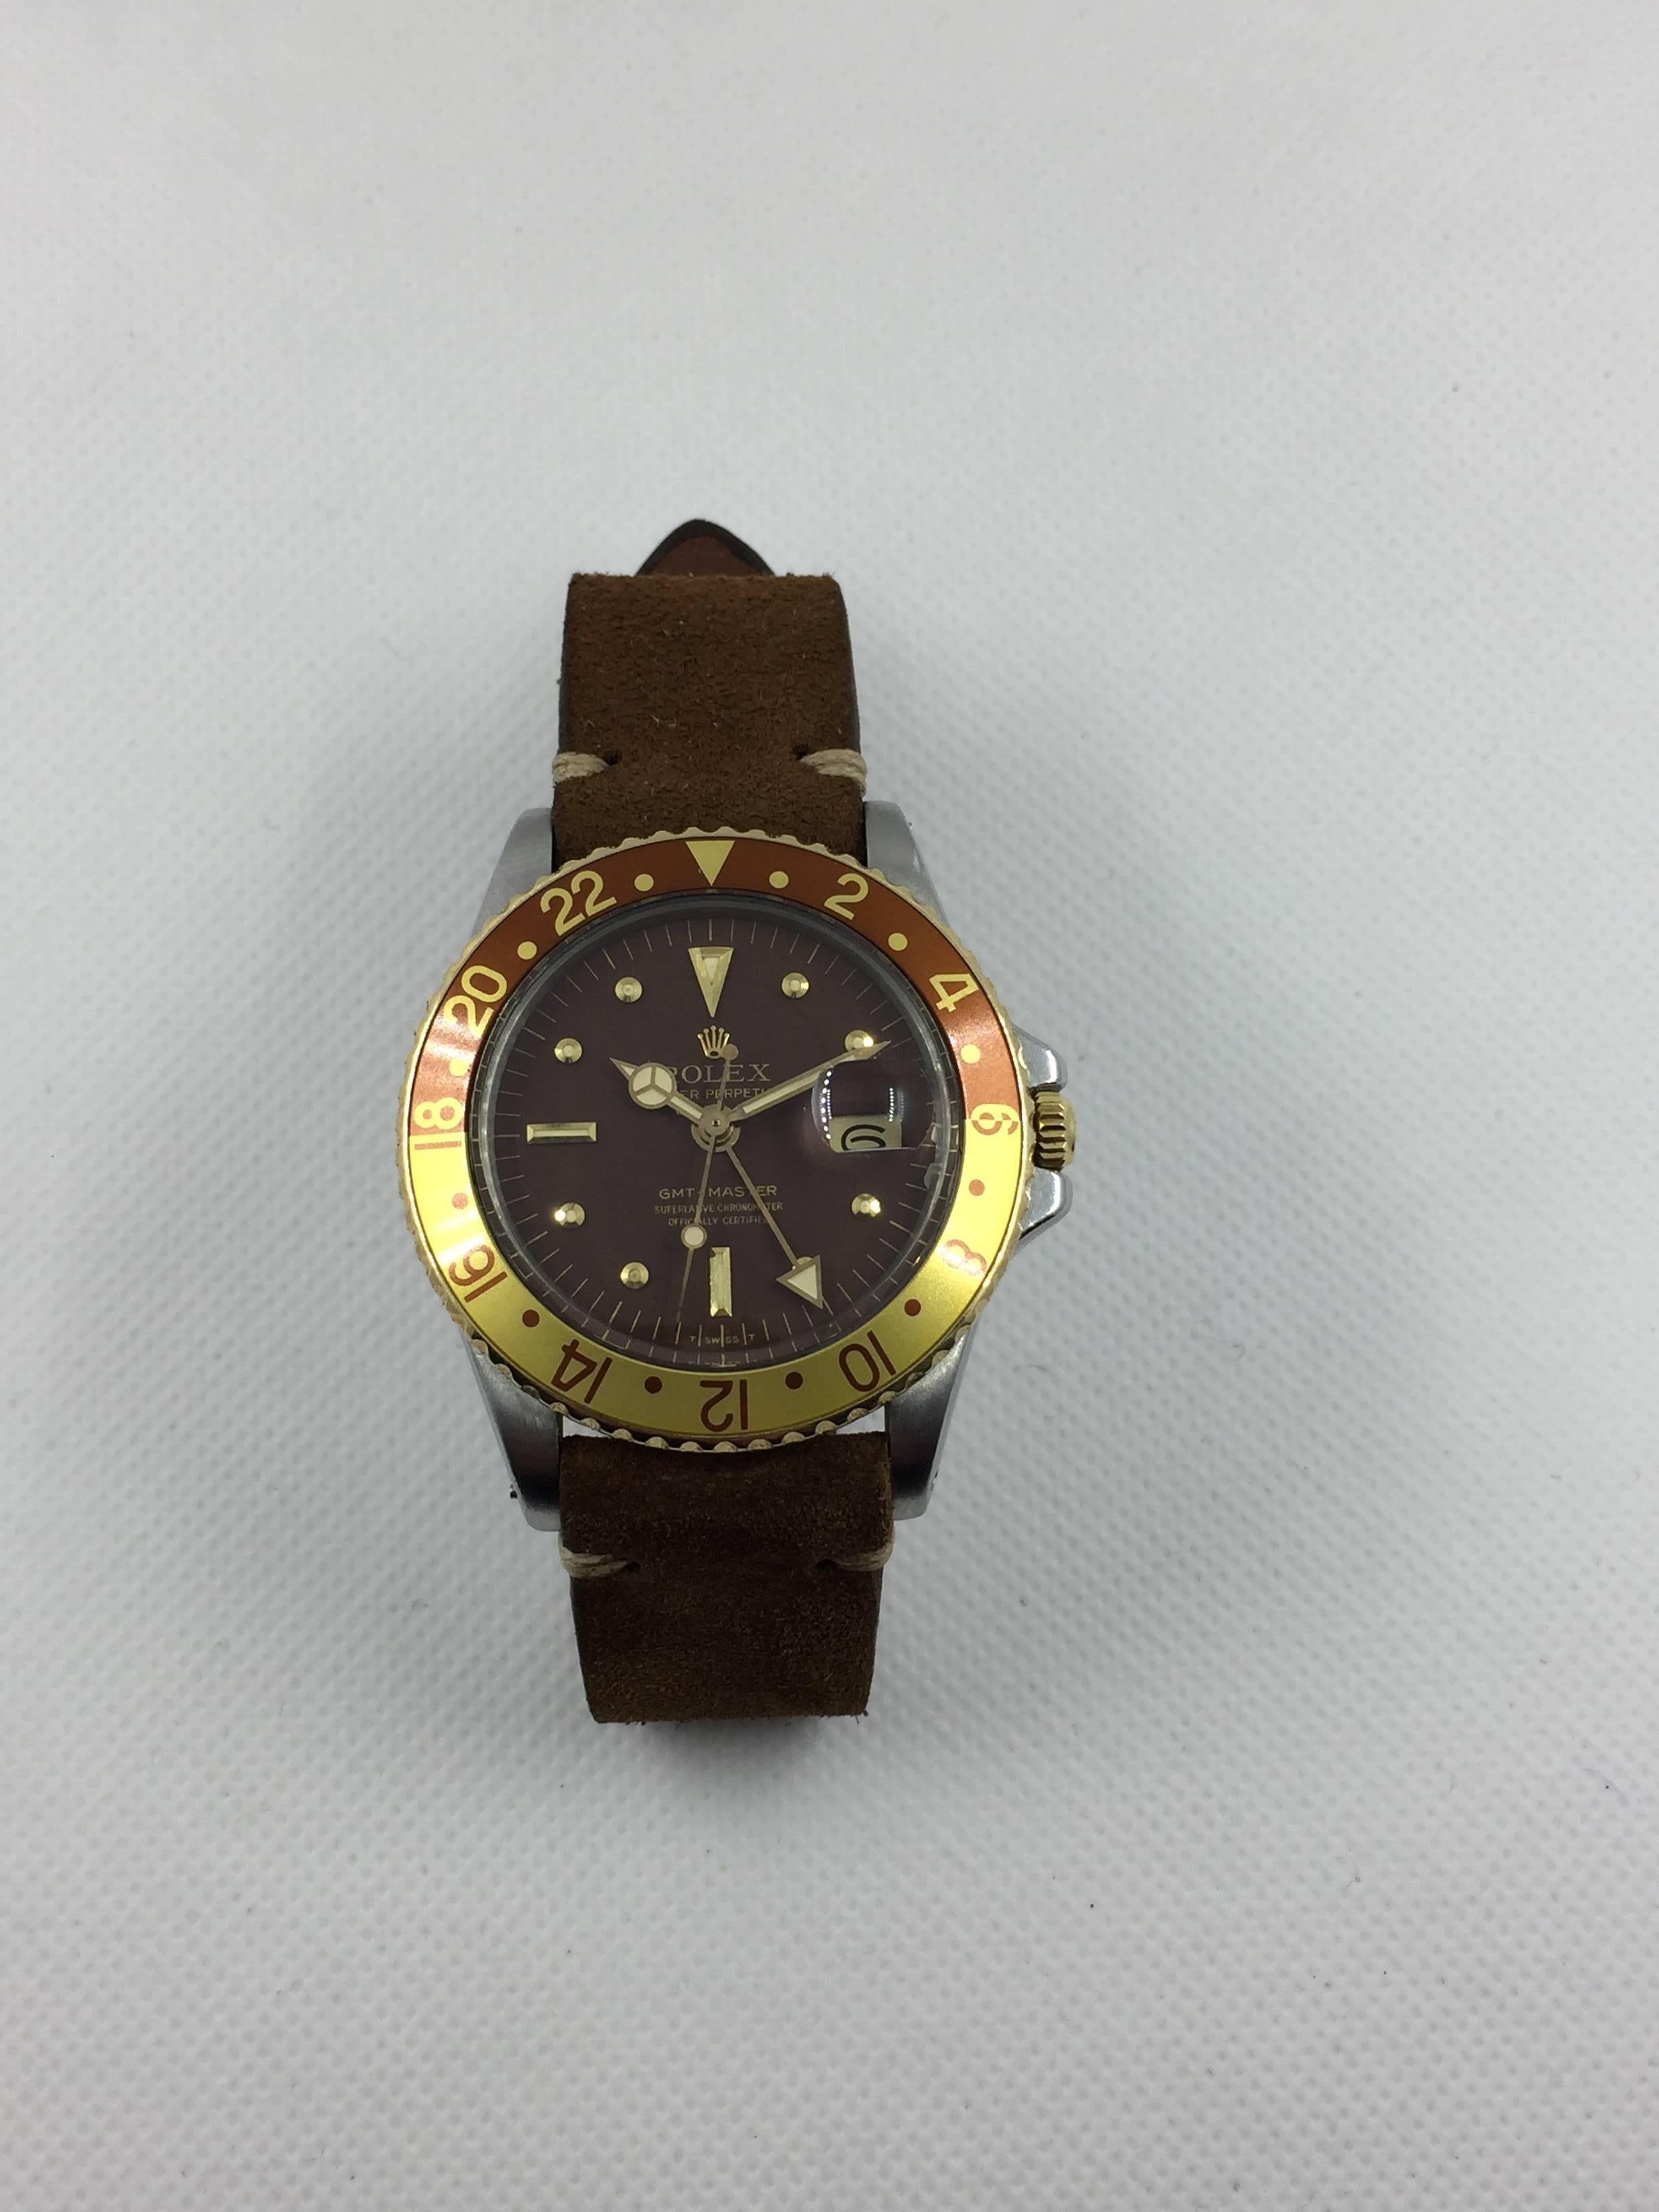 Rolex Stainless Steel and Yellow Gold Oyster Perpetual GMT Master Wristwatch
Factory Brown Nipple Dial with Applied Rolex Crown. Dial Shows Minor Wear and Breakdown Around Perimeter.
Yellow Gold Rotating Bezel with 'Rootbeer' Brown and Yellow